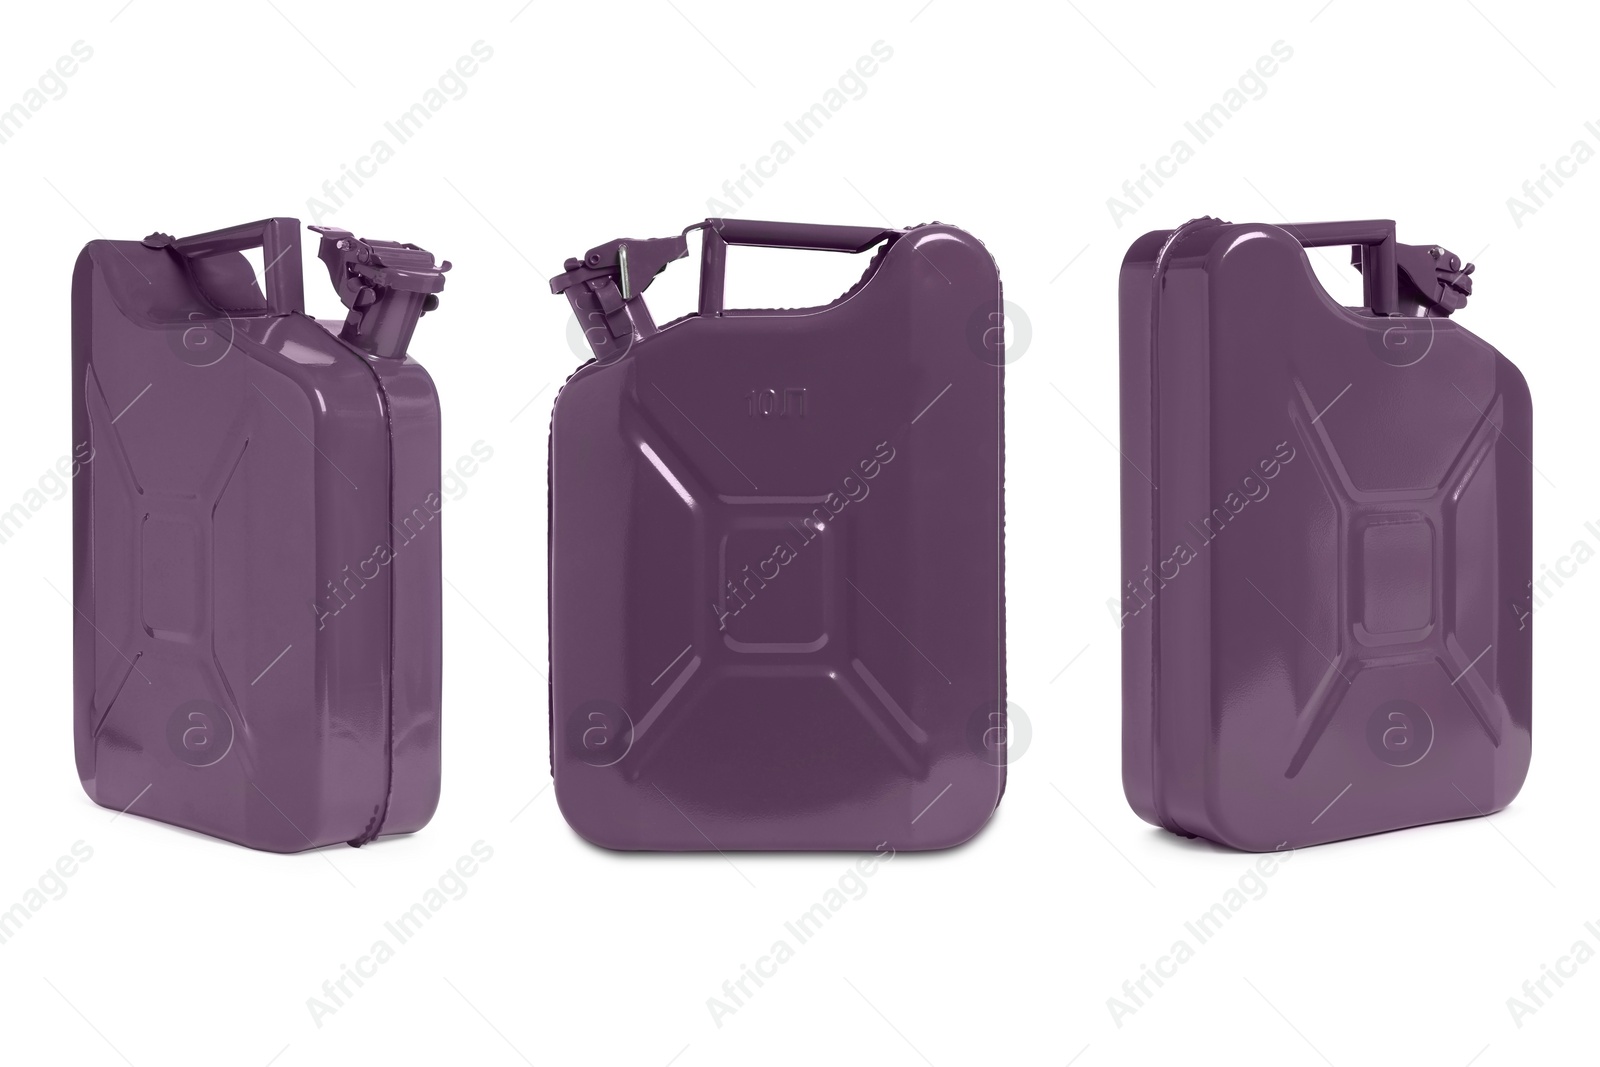 Image of Purple canister on white background, different sides